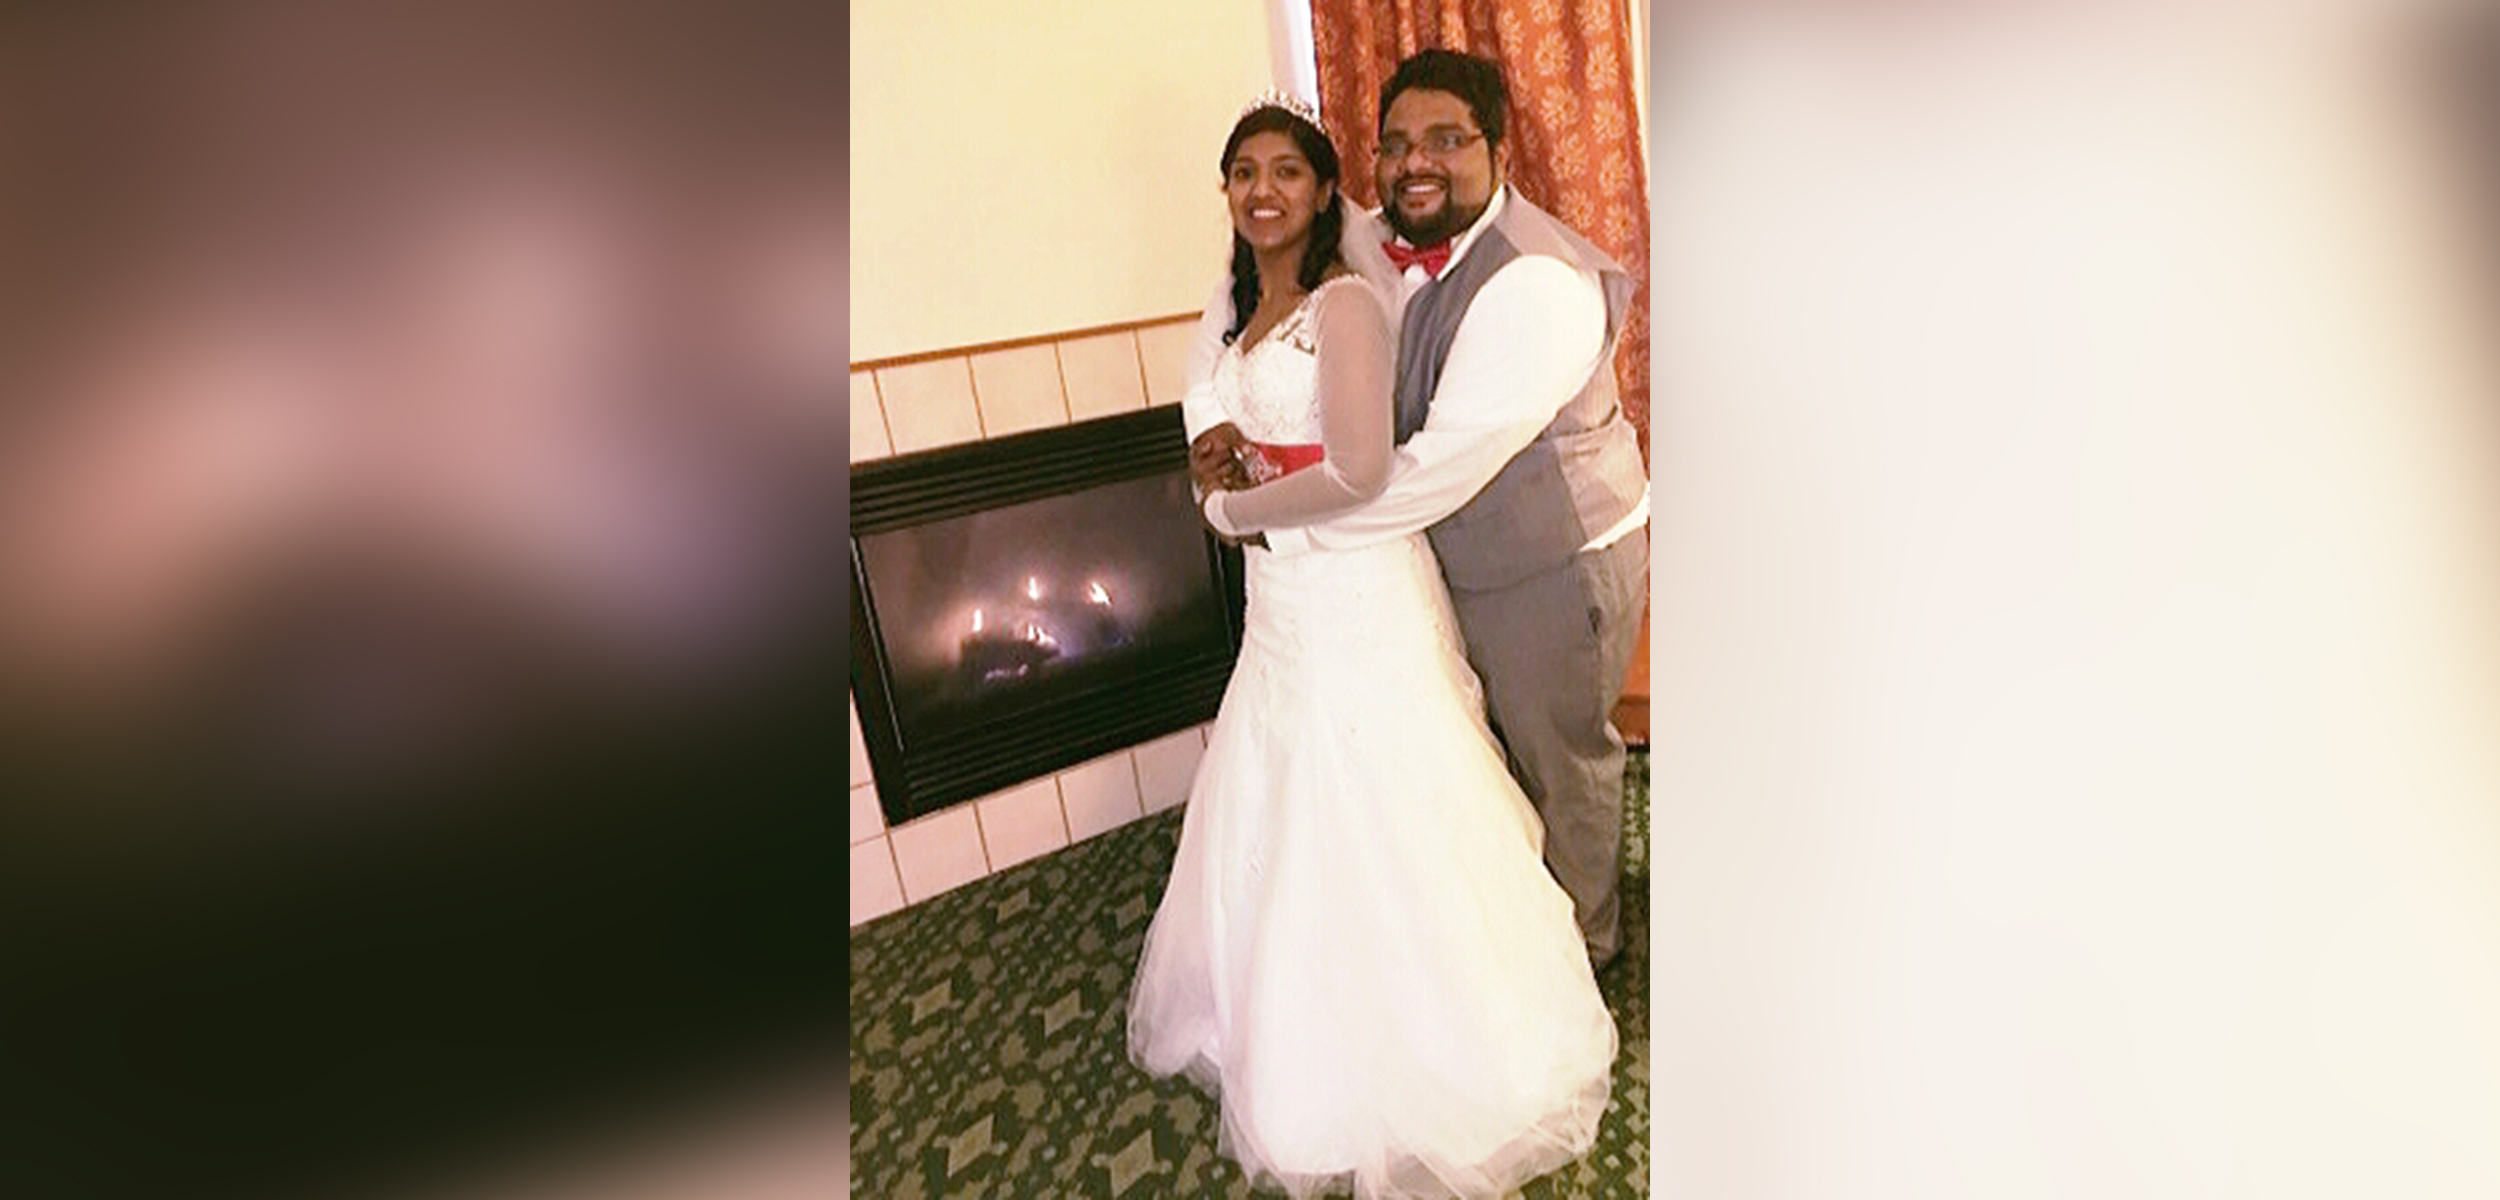 PHOTO: Anu Philip, 28, of Heartland, Texas, received a kidney transplant on March 19 and married Jeswin James, 28, a week later on March 25. 